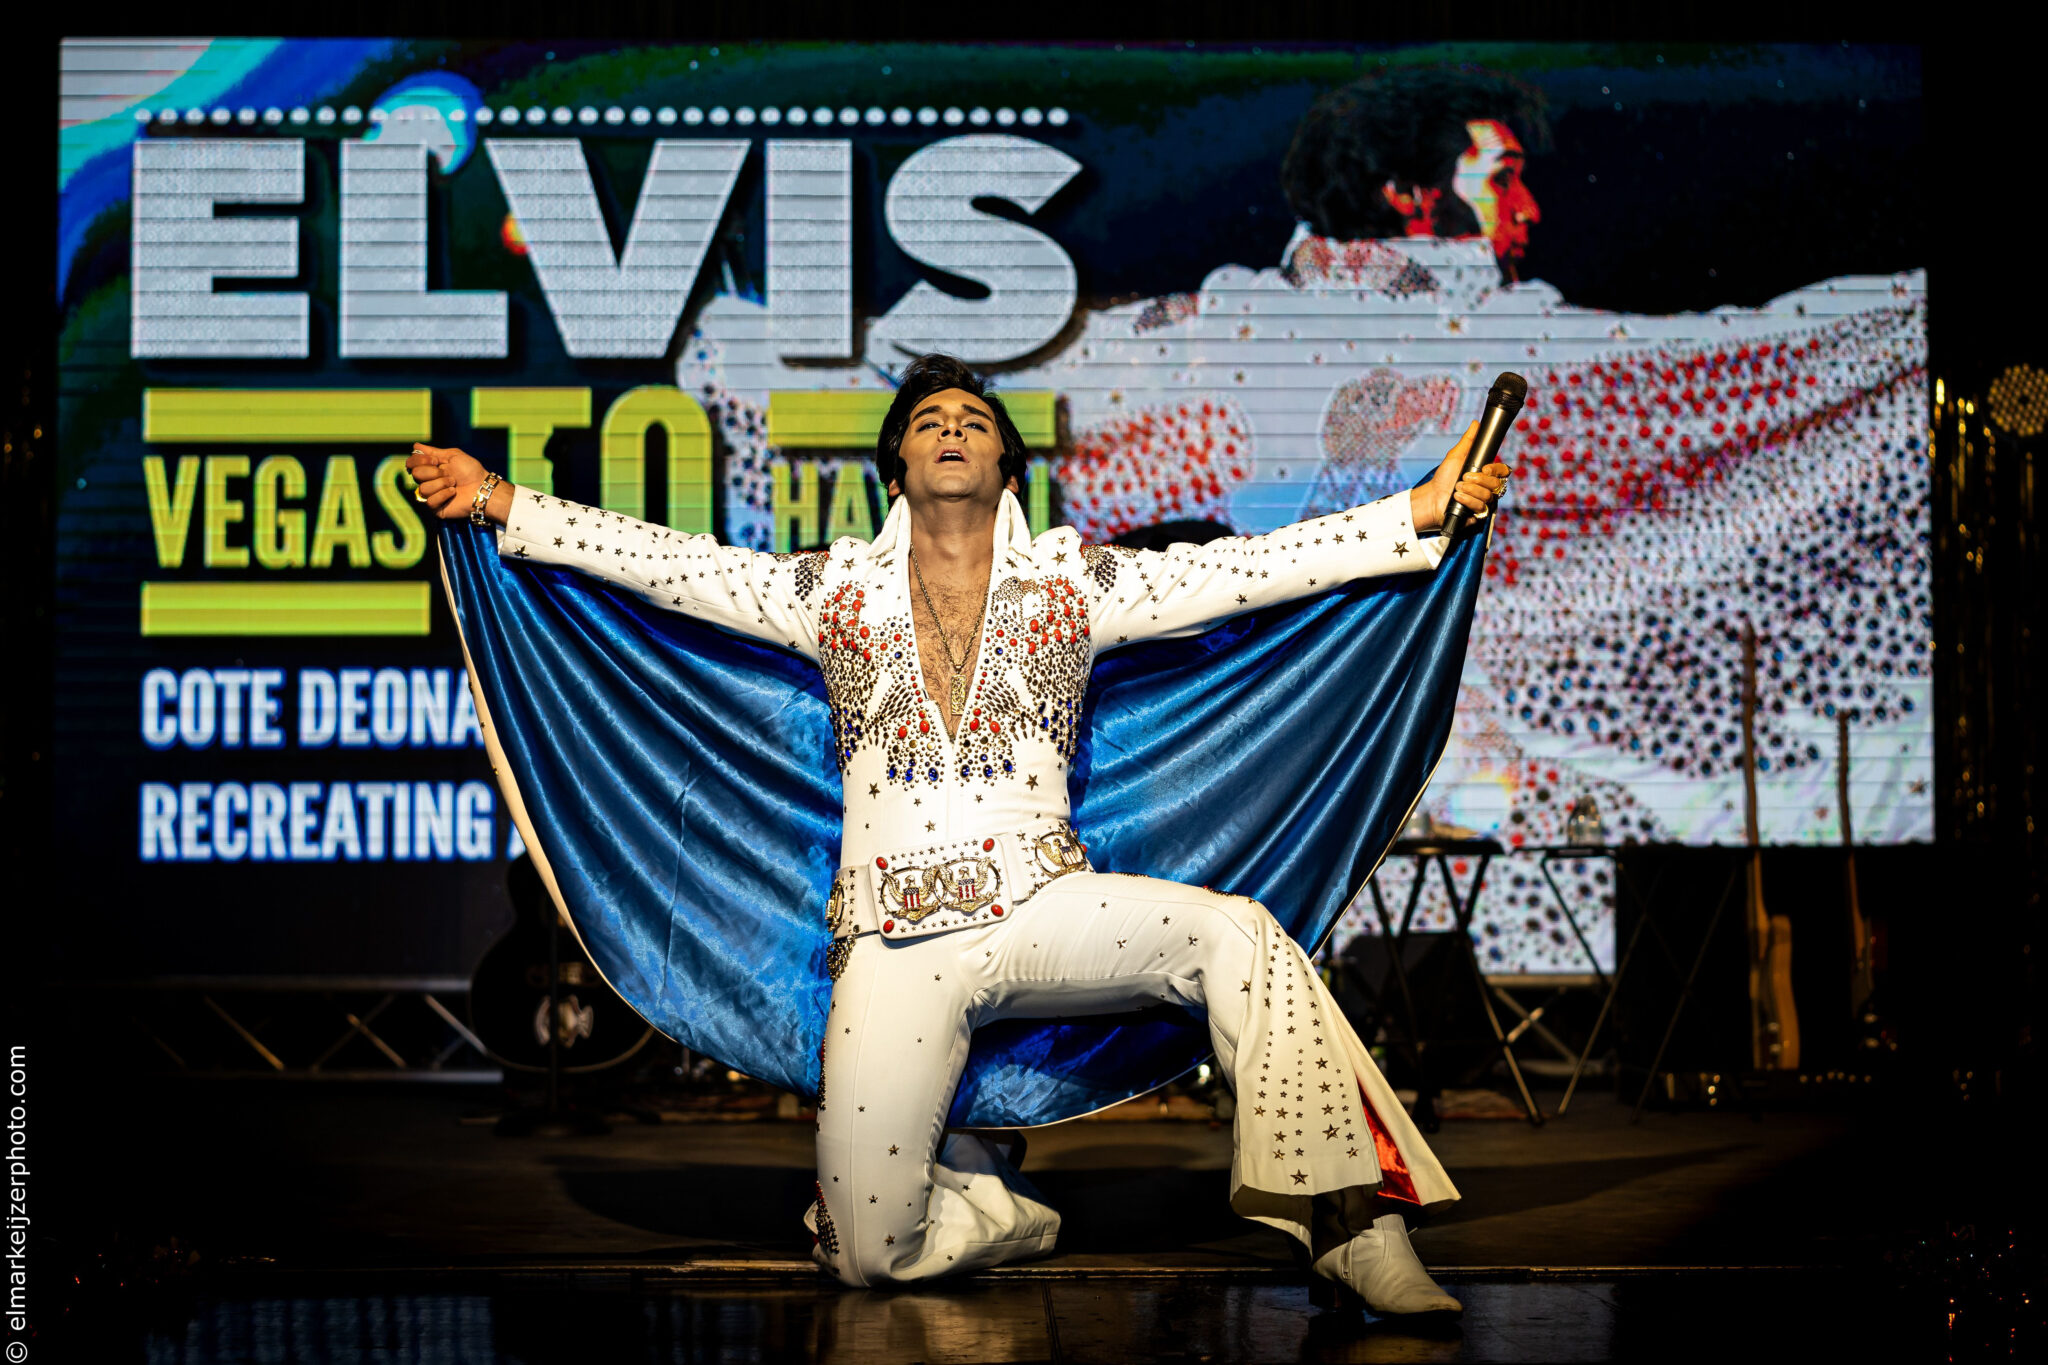 Cote Deonath as Elvis 68 to Vegas Circle Square Cultural Center